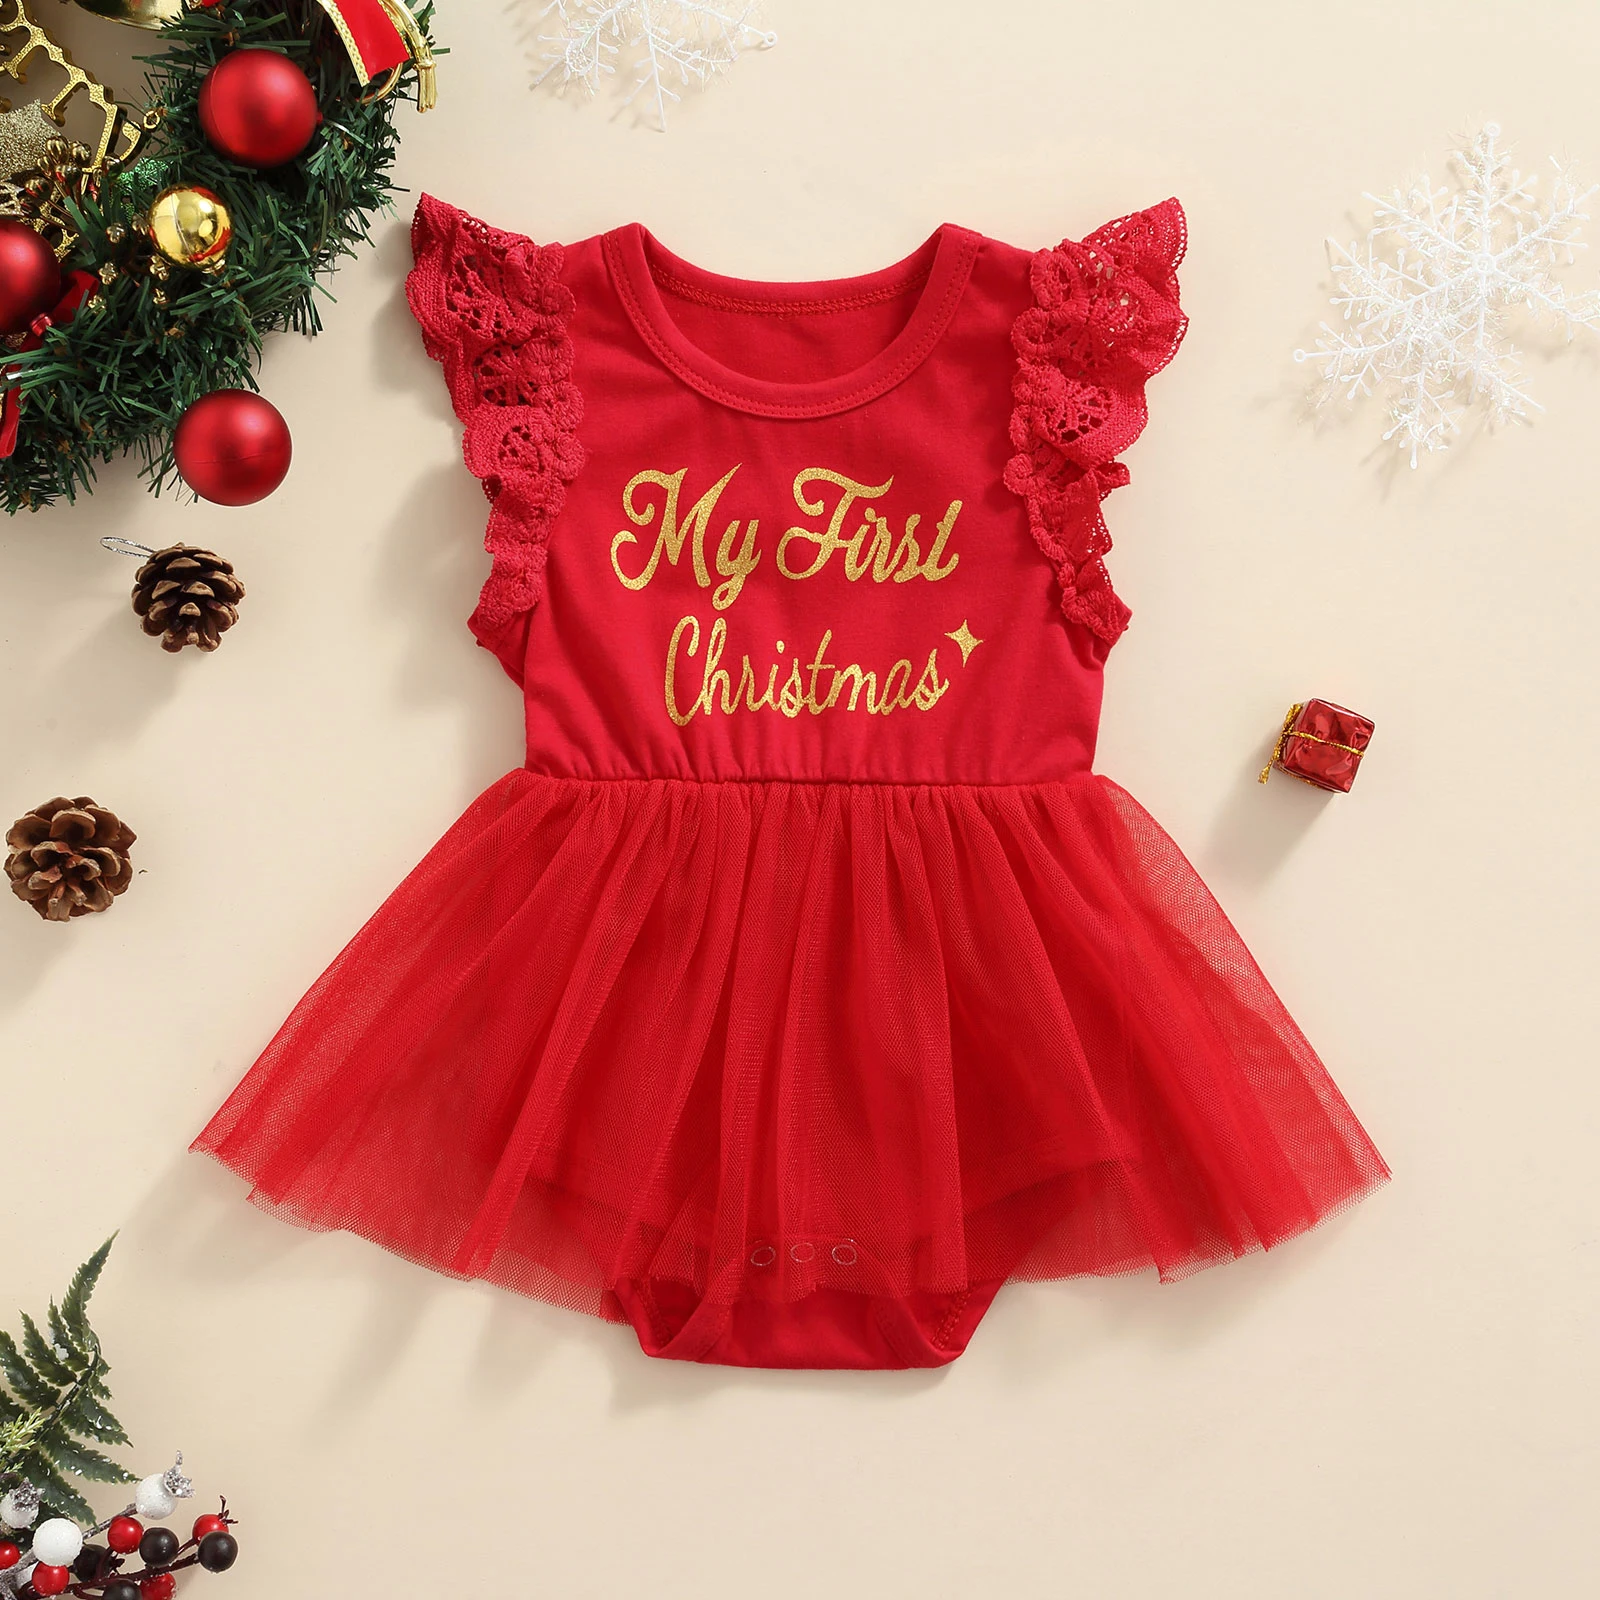 

New Christmas Romper Newborn Baby Girls Clothes Sleeveless Lace Tutu Dress Letter Print Jumpsuit Tops Yarn Skirt Triangle Crotch